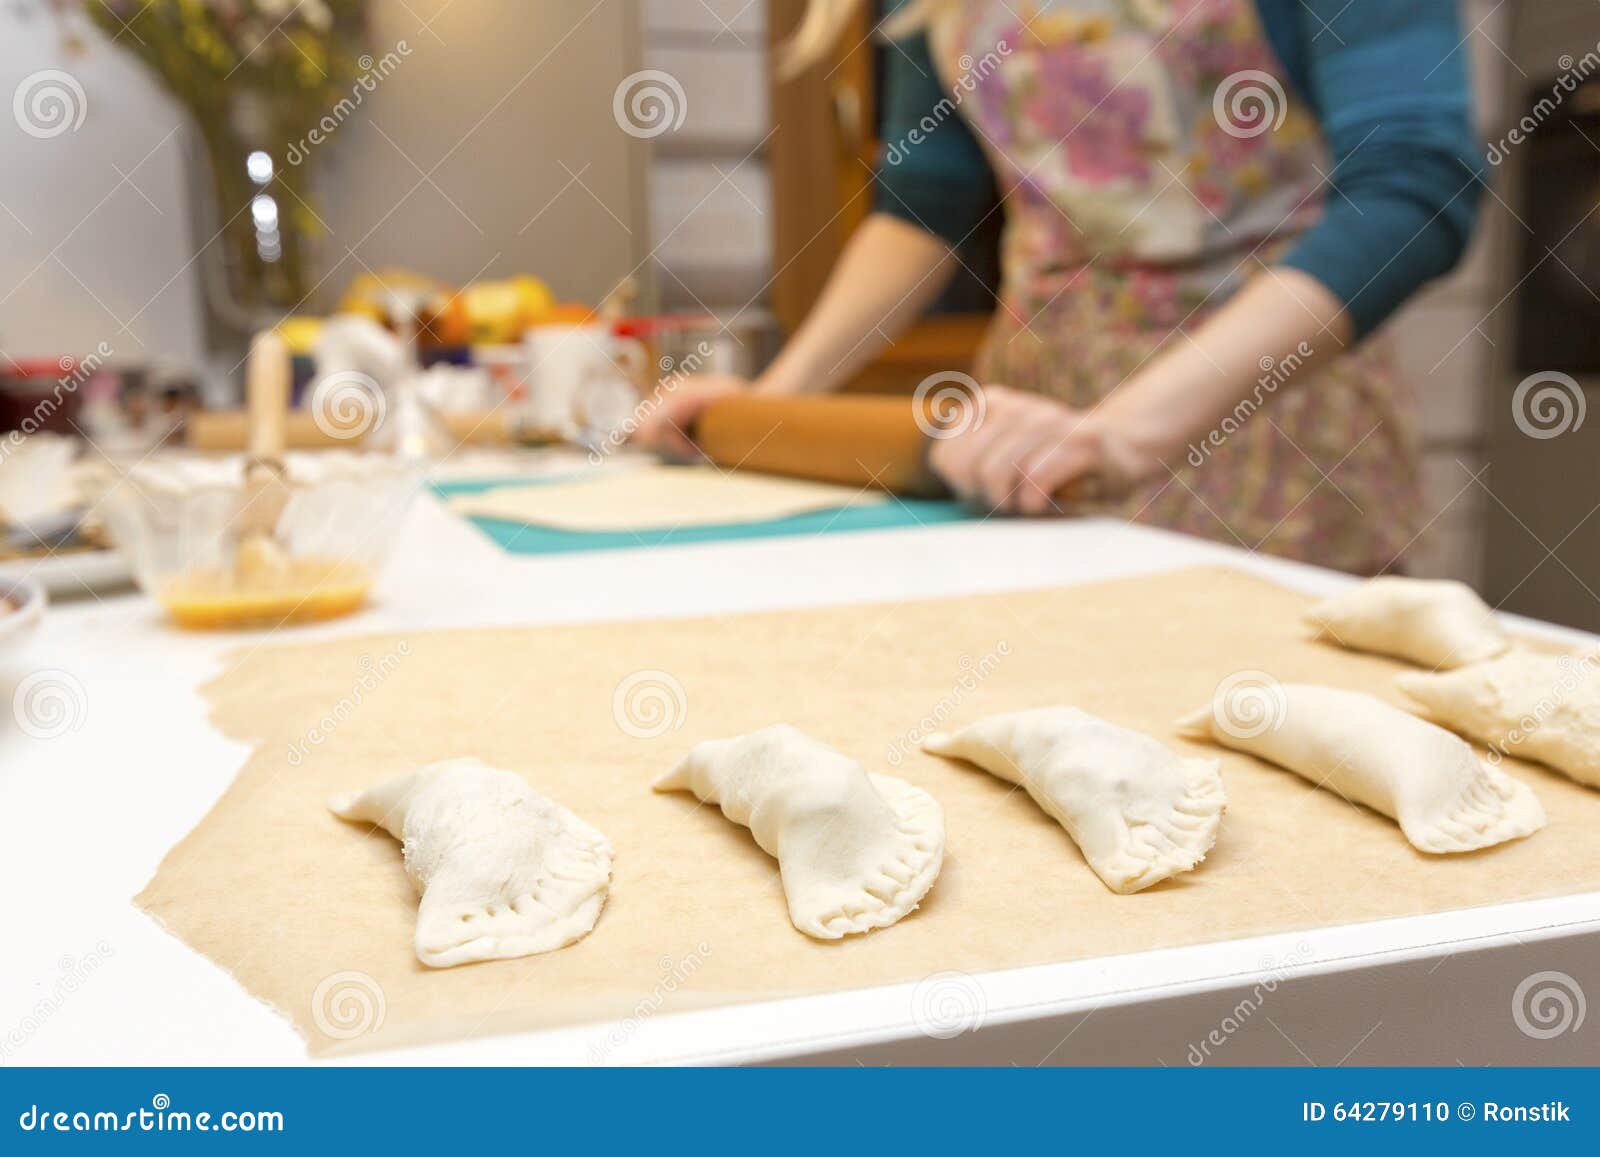 woman baking pies in her home kitchen